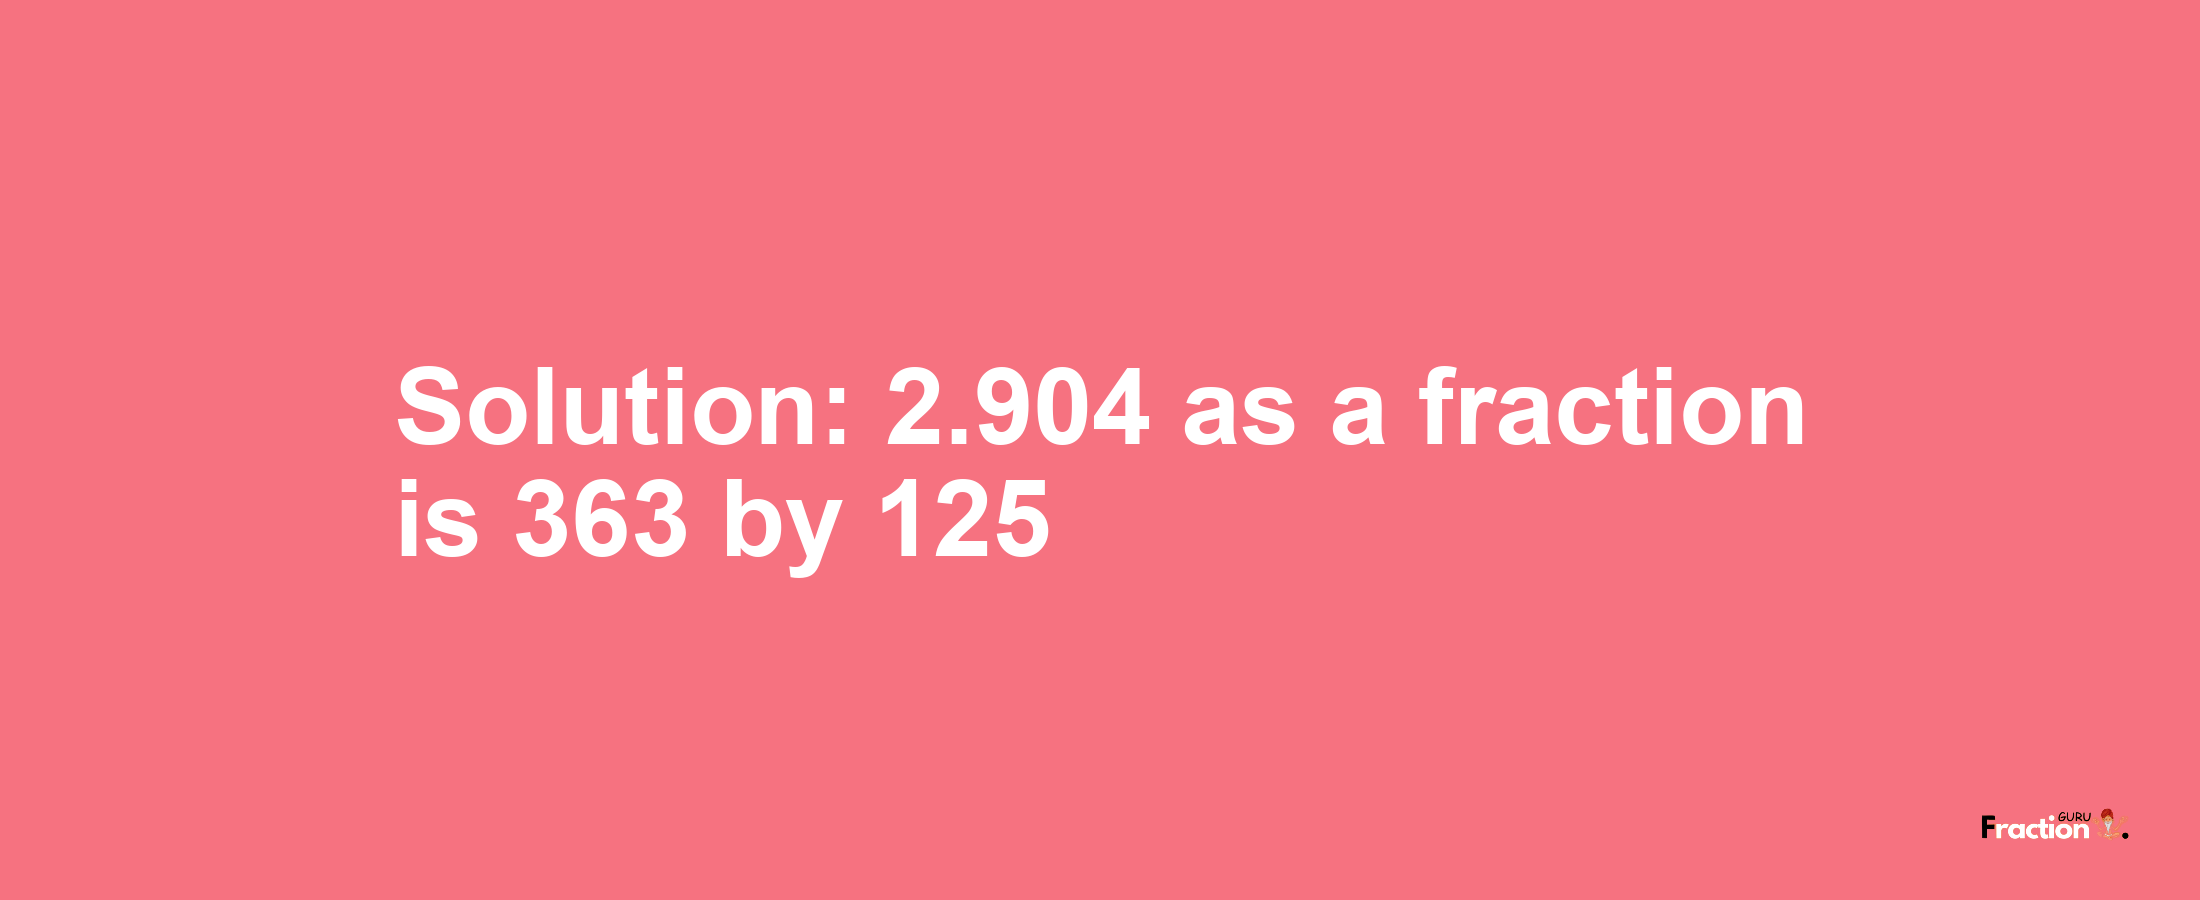 Solution:2.904 as a fraction is 363/125